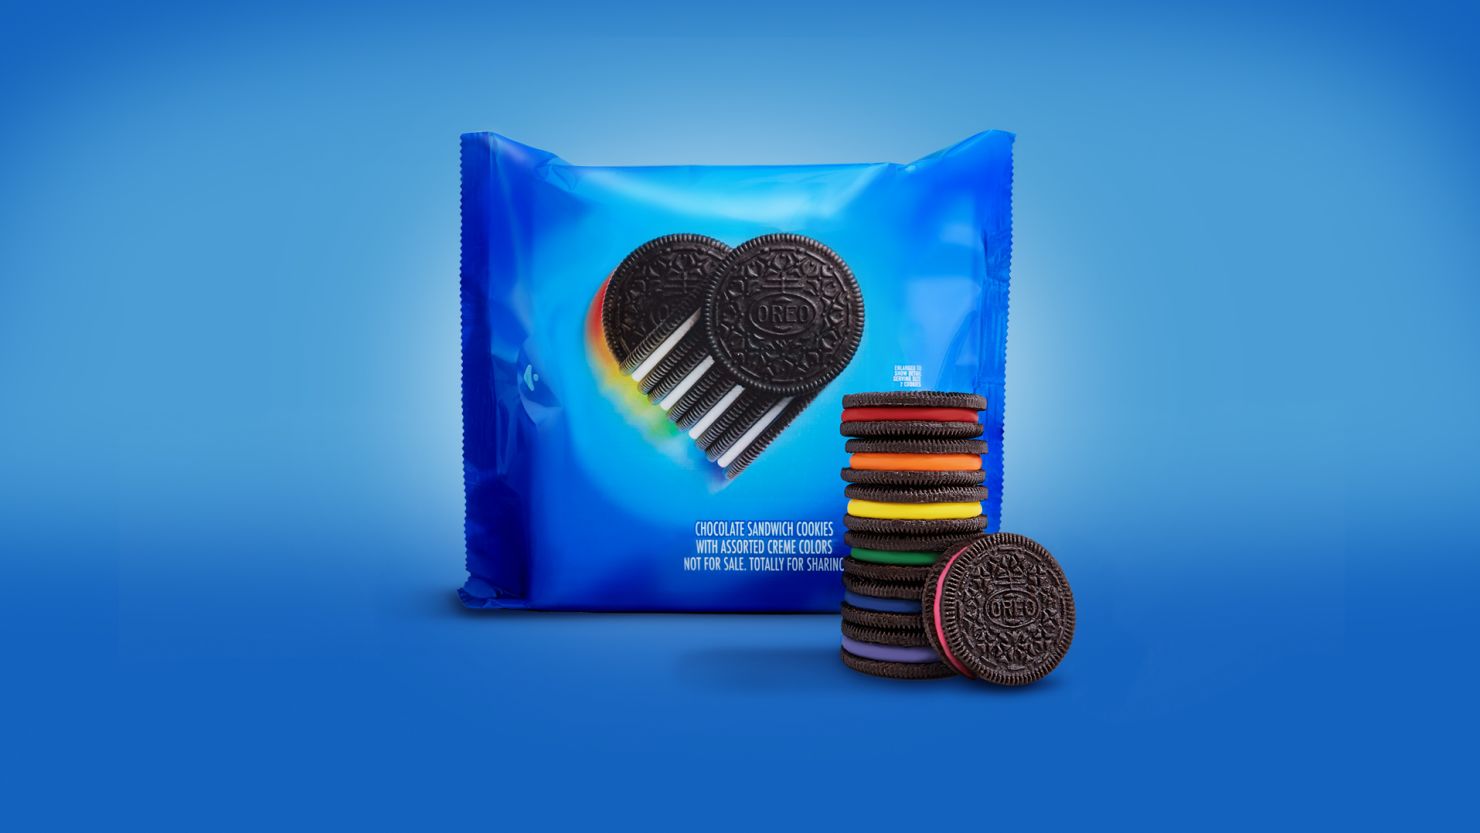 Oreo created limited edition rainbow cookies to celebrate LGBTQ+